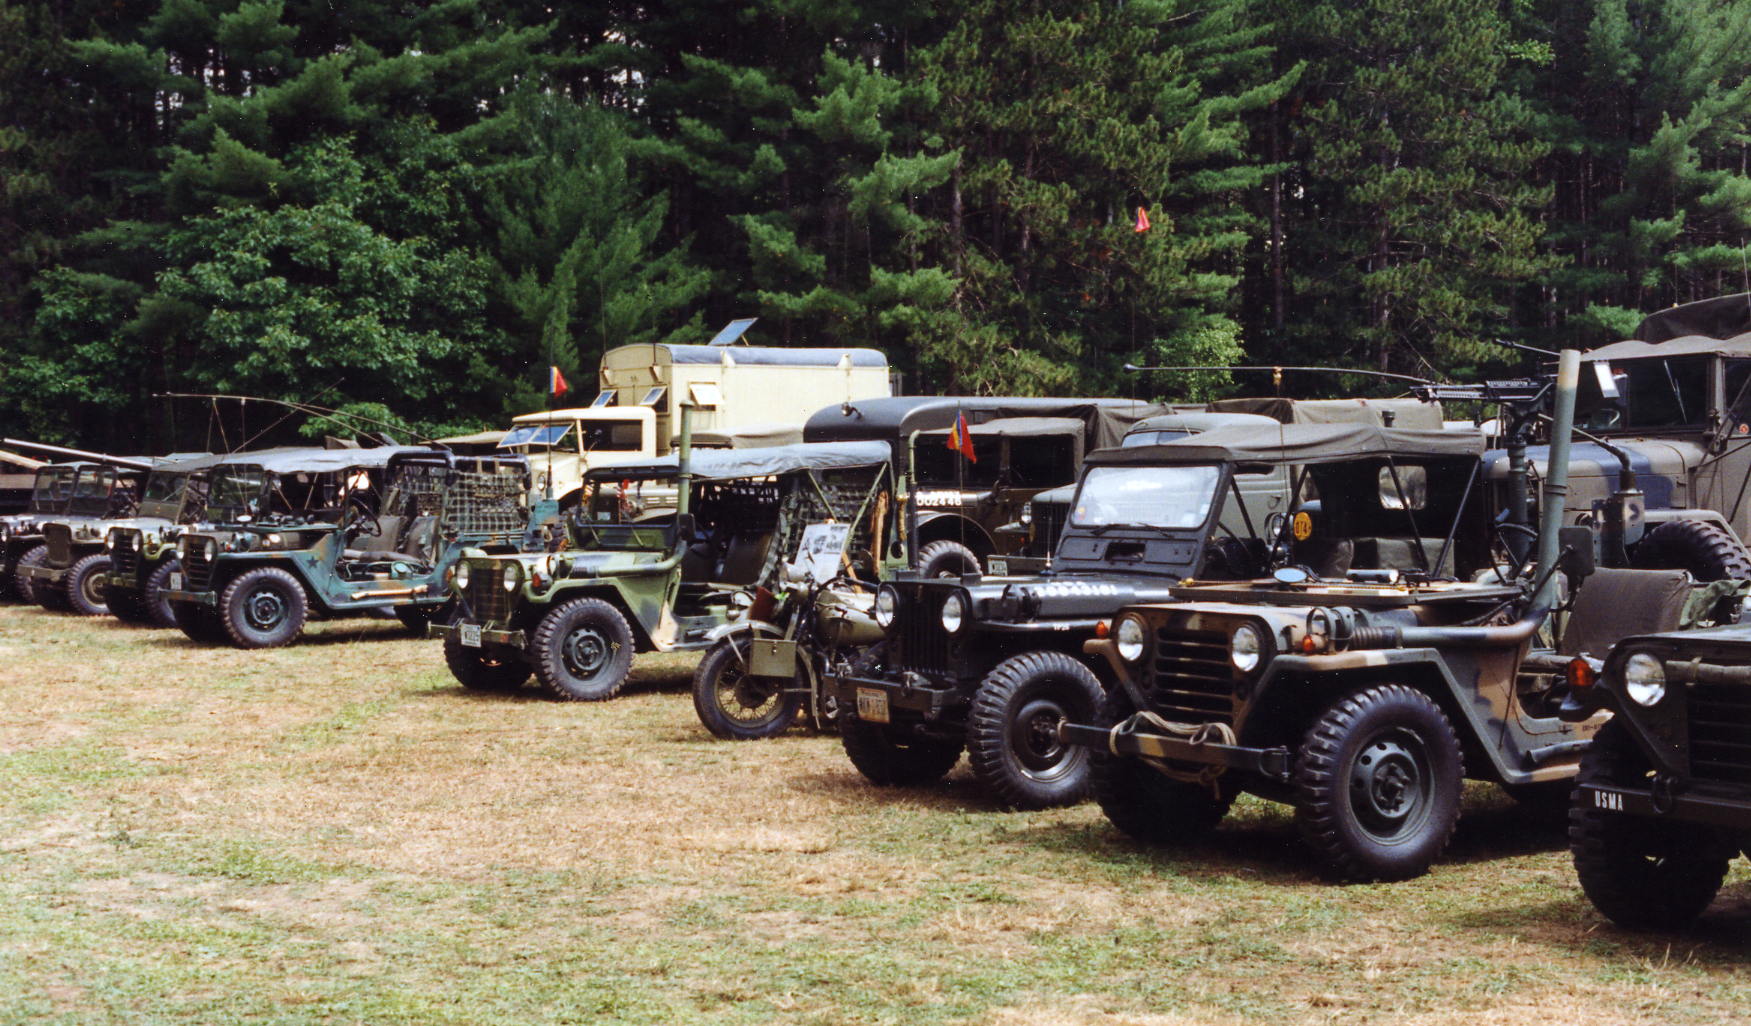 Vehicles at Weare Rally